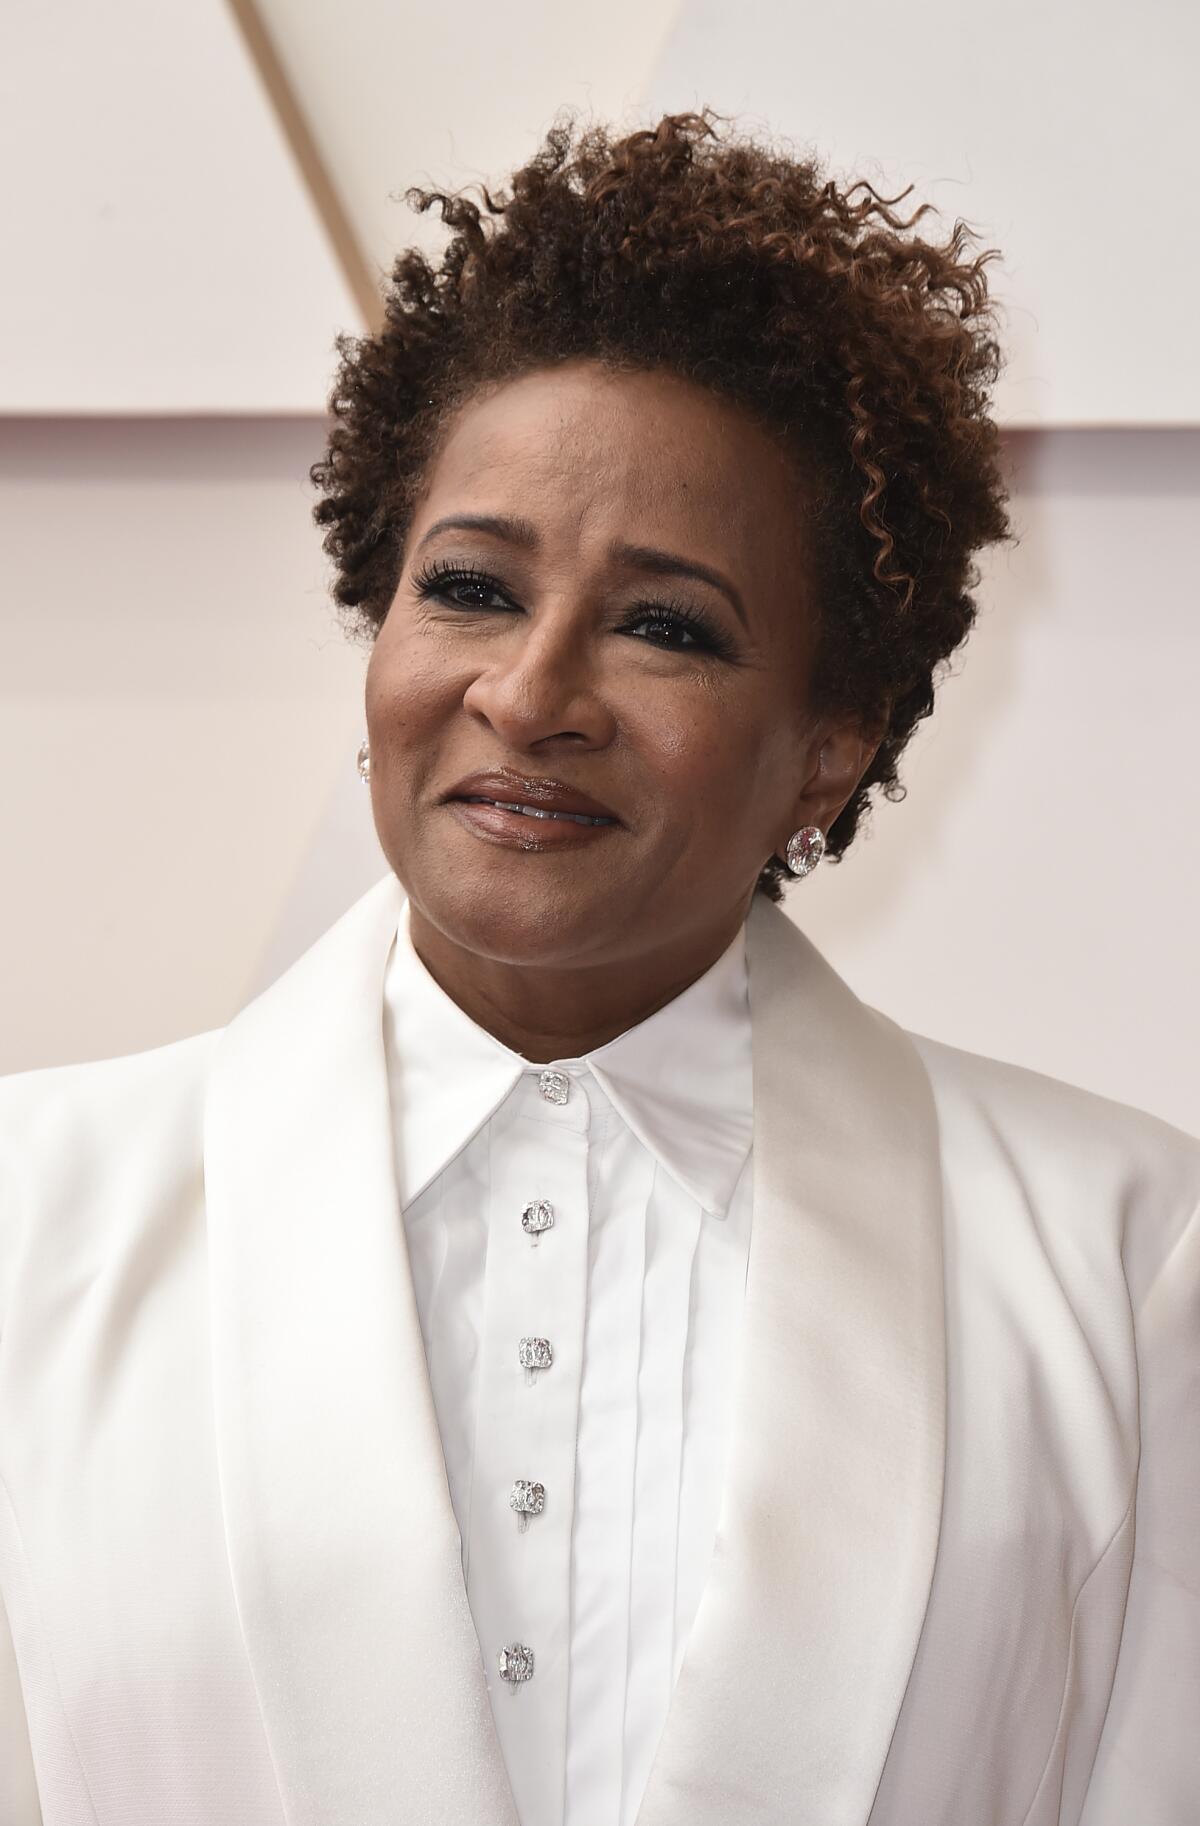 A Black woman wearing a white tuxedo poses on a red carpet